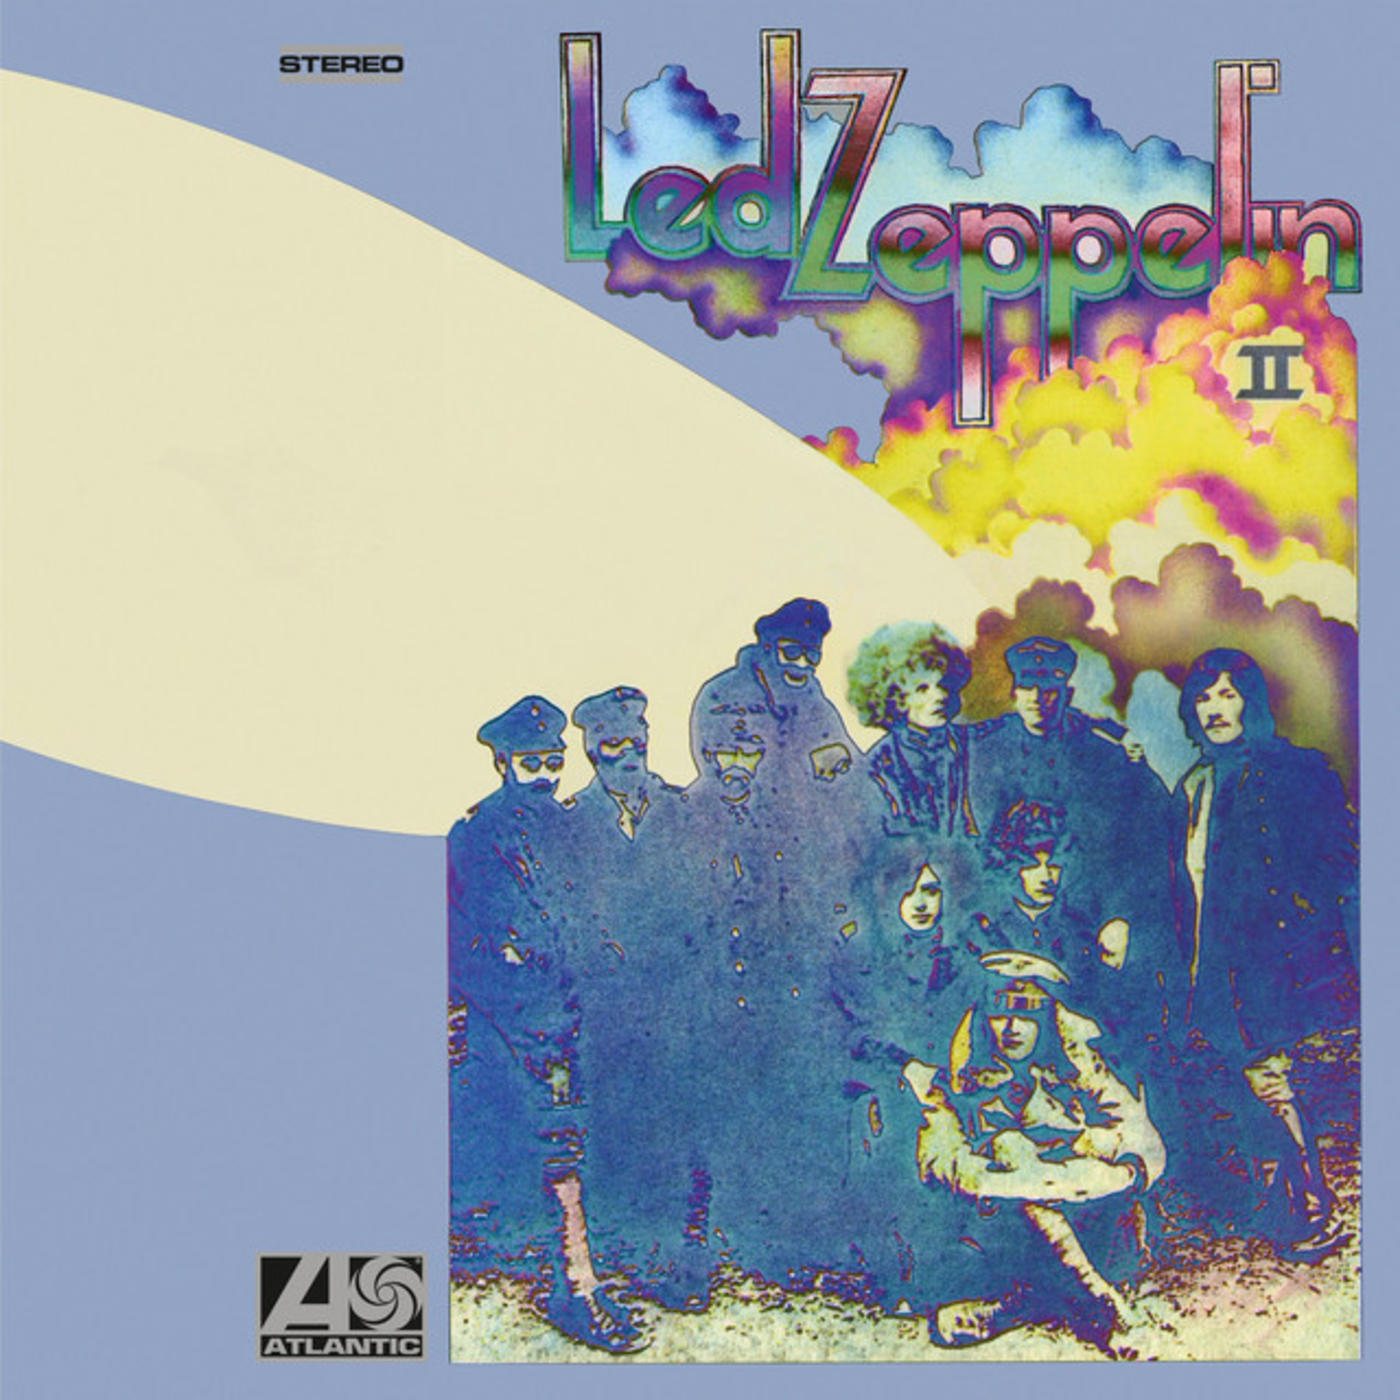 Rhino Factoids: Led Zeppelin Releases Their First-Ever UK Single 